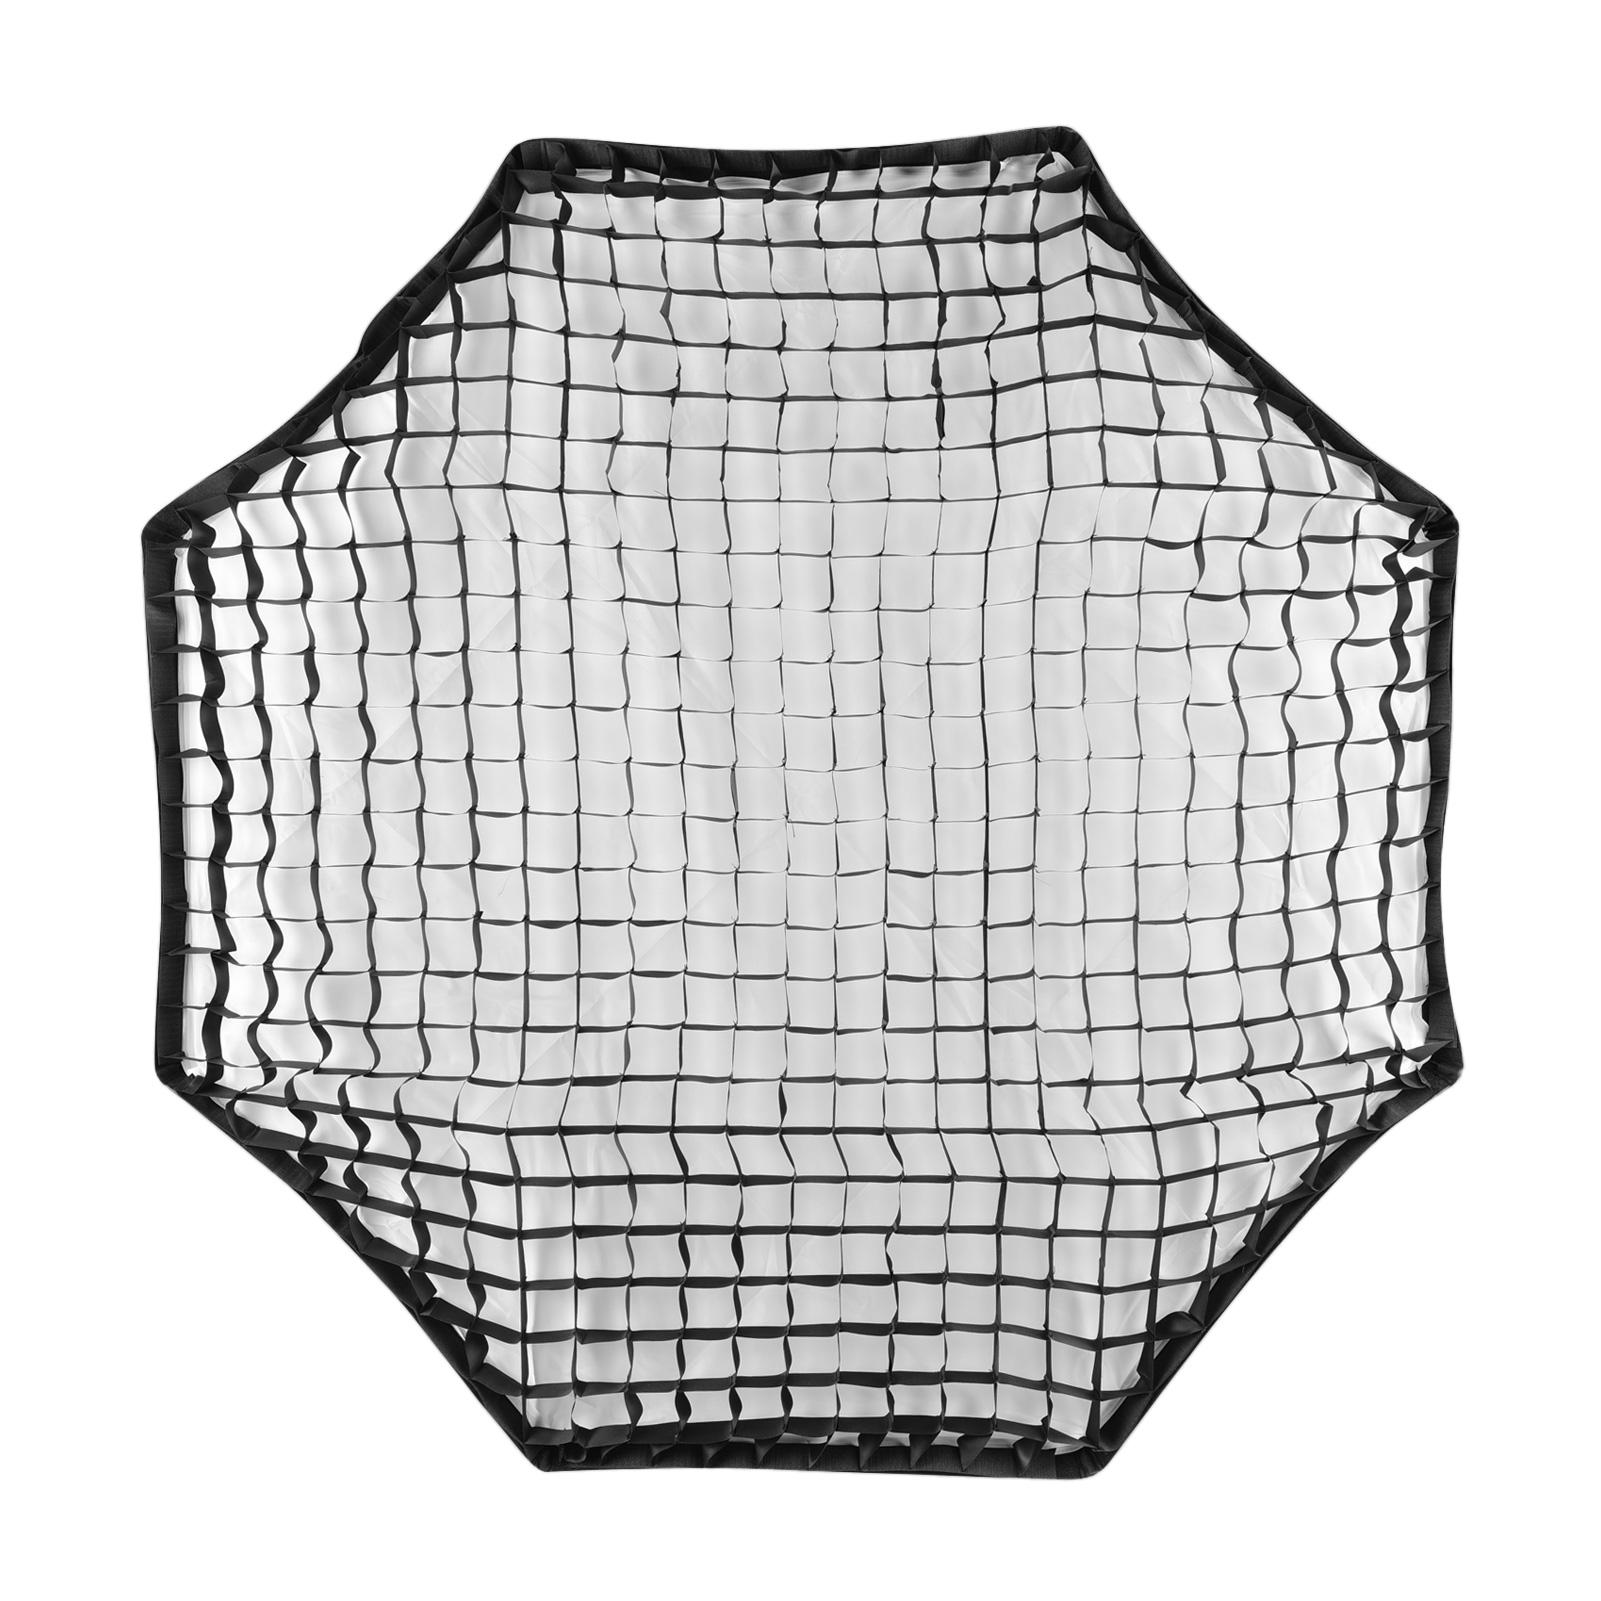 TOMTOP JMS 140cm/ 55in Photography Octagon Softbox Grid Black Honeycomb Grid Softbox Reflector Portrait